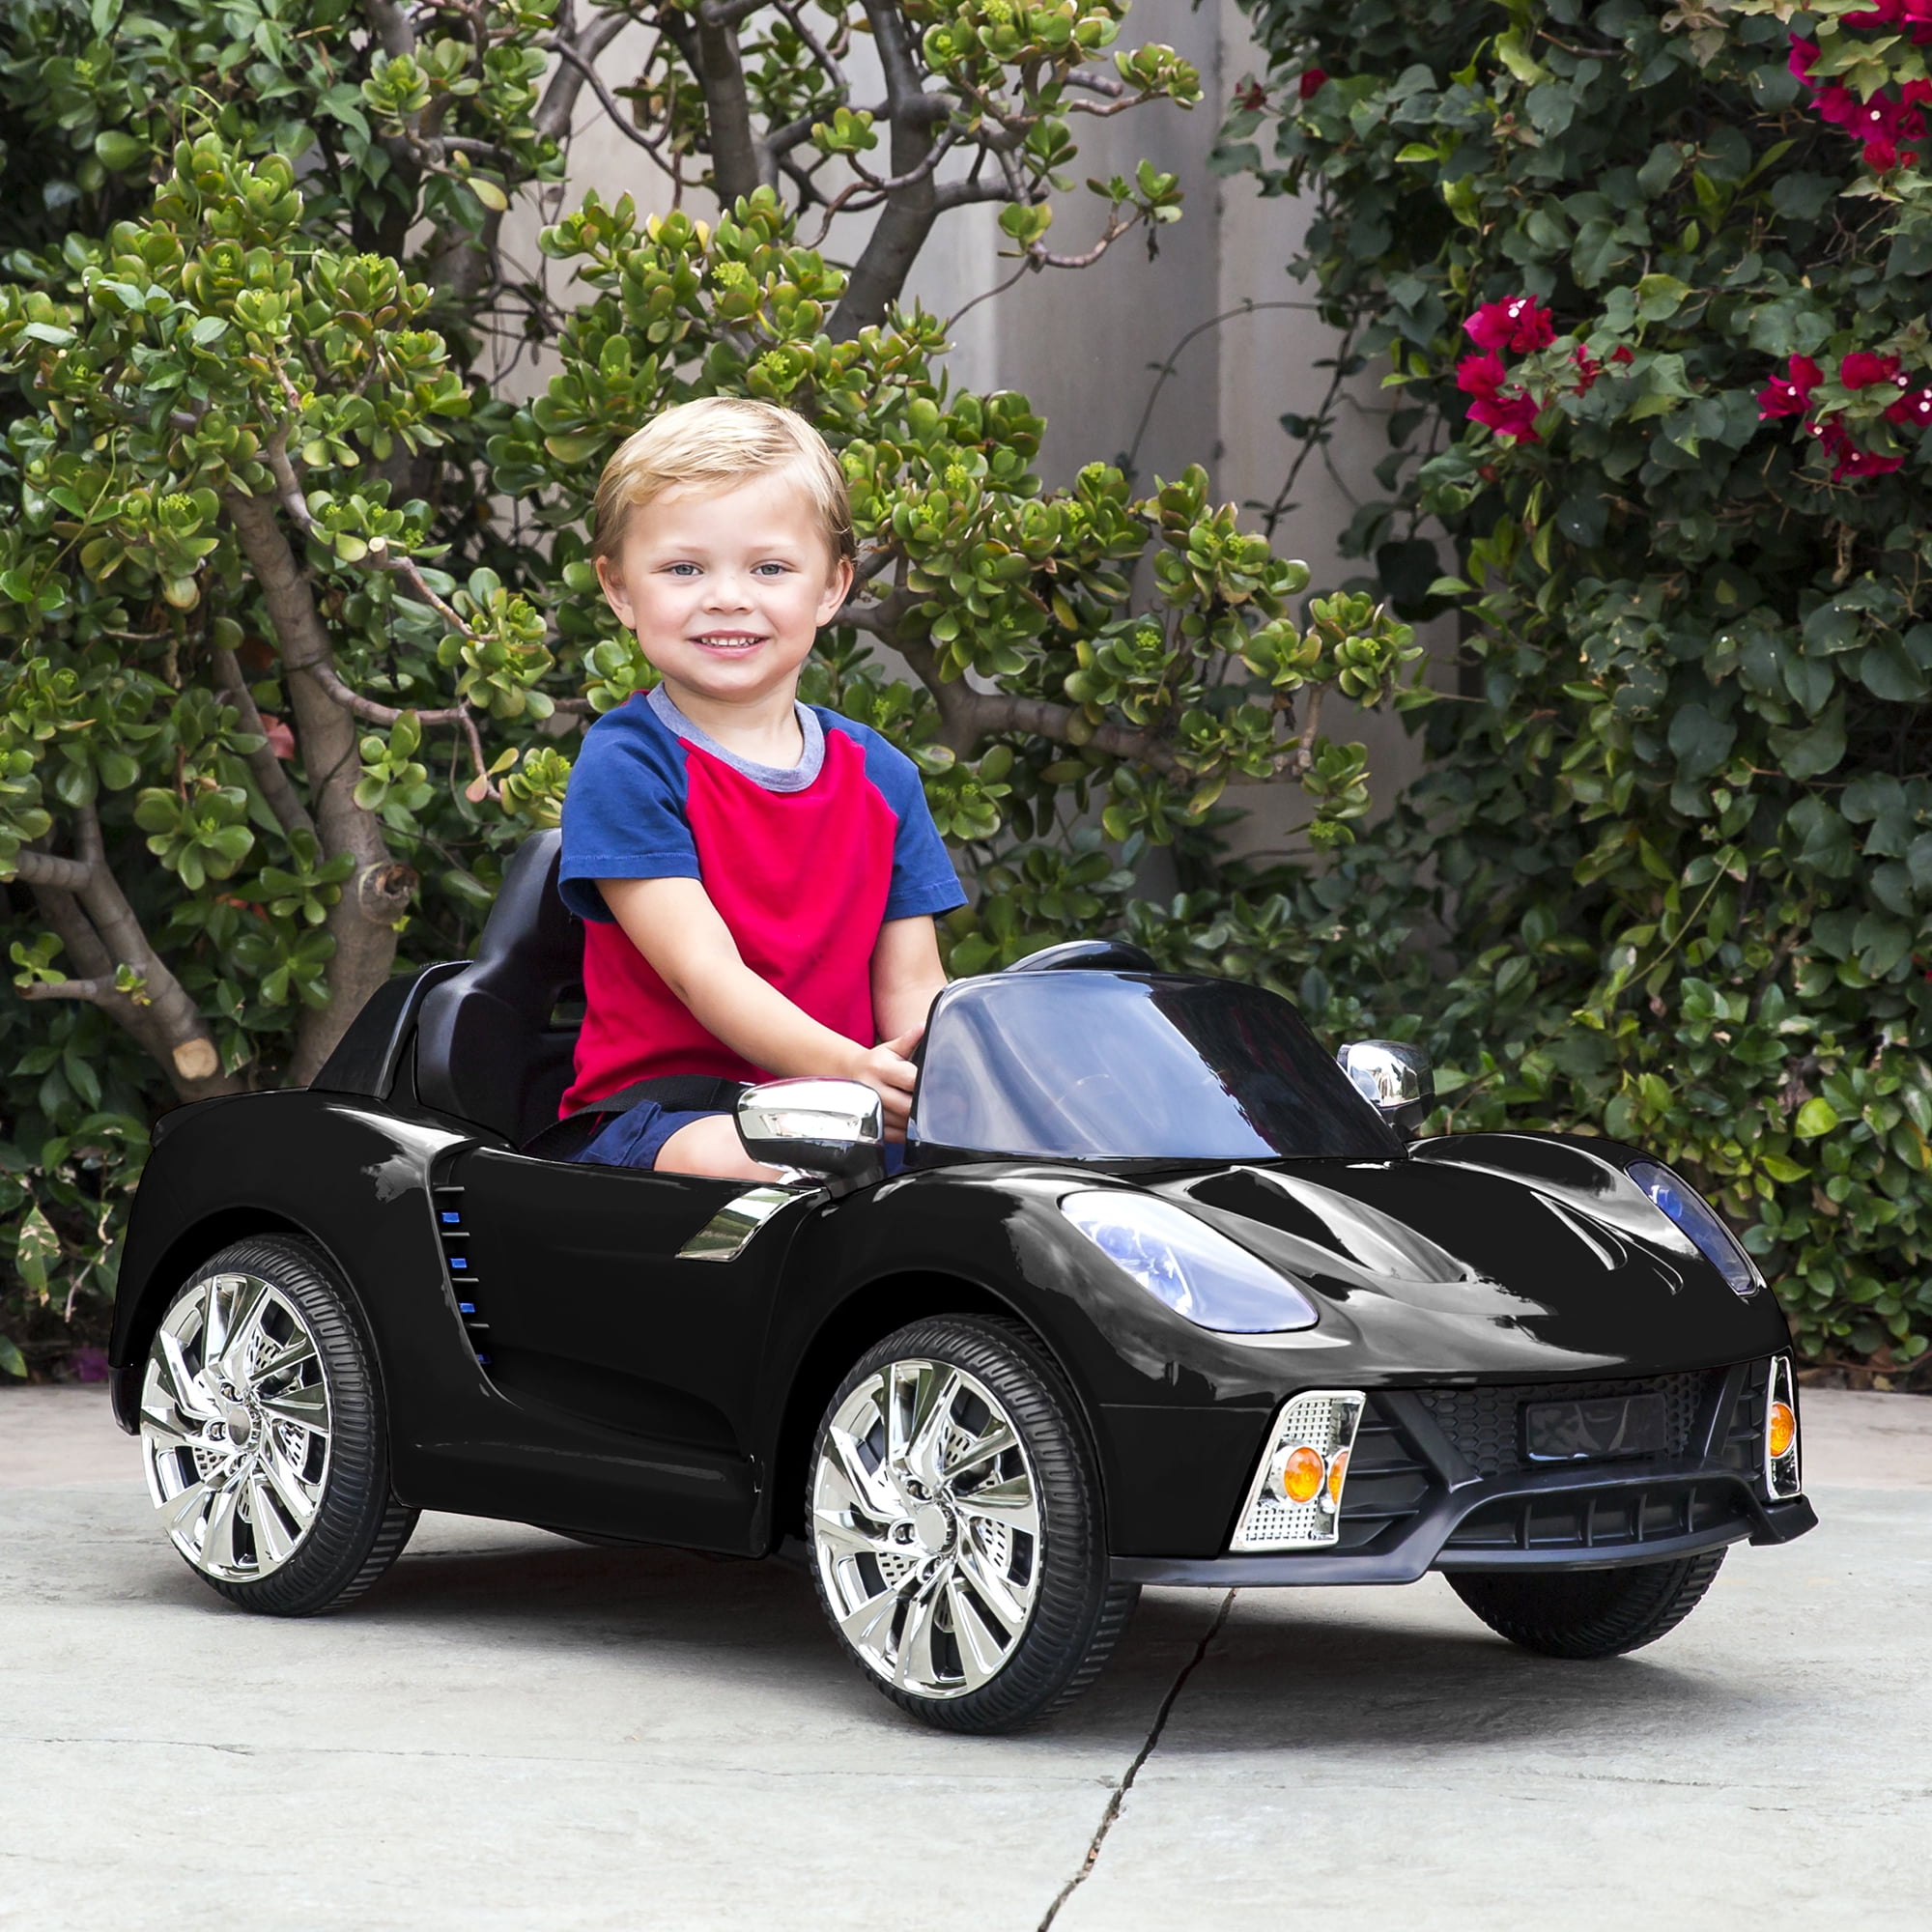 power wheels that parents can control